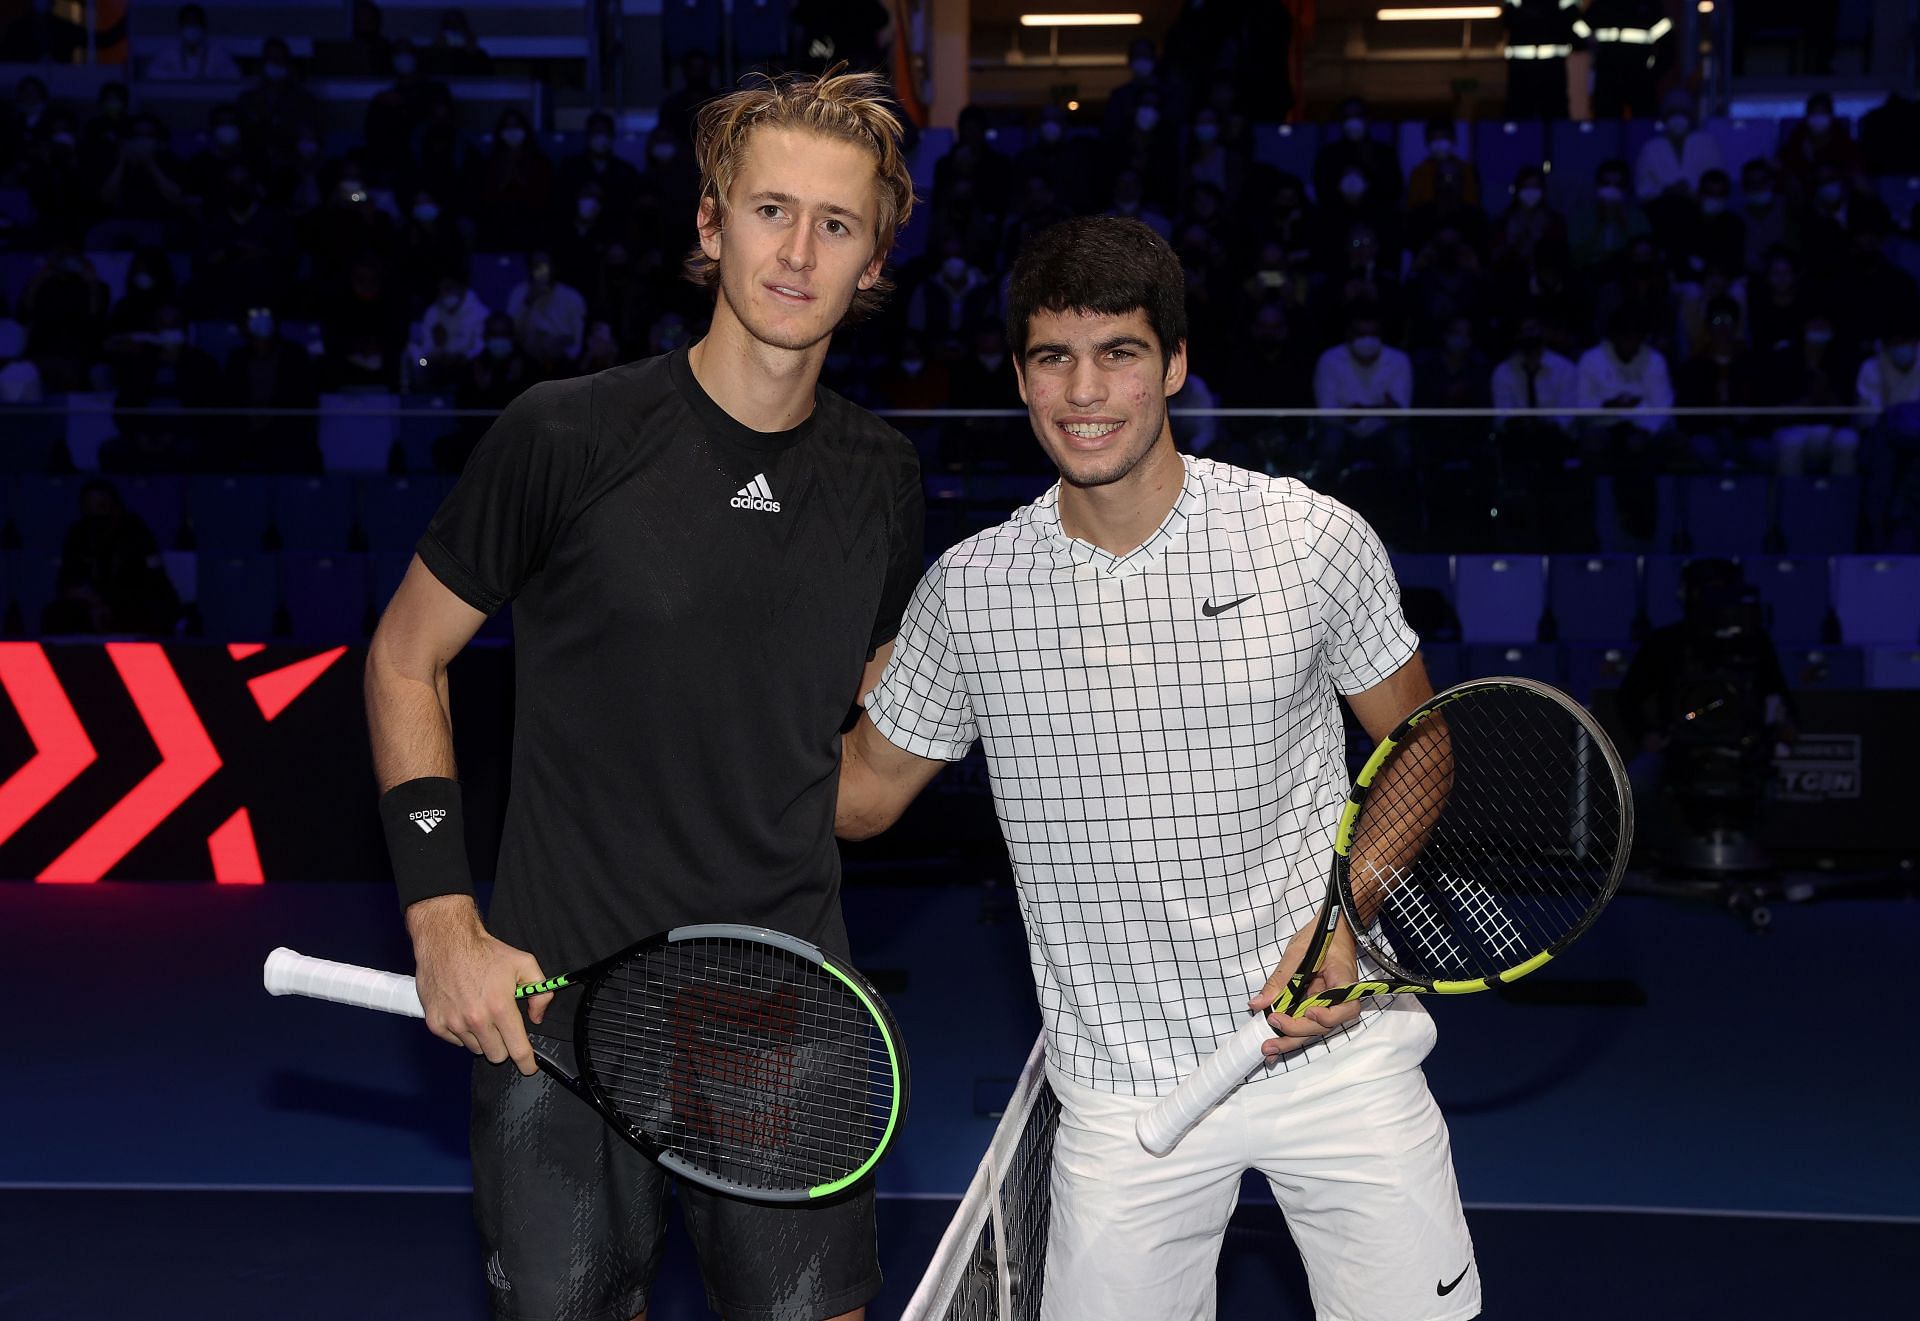 Carlos Alcaraz takes on Sebastian Korda in the third round of the 2022 French Open